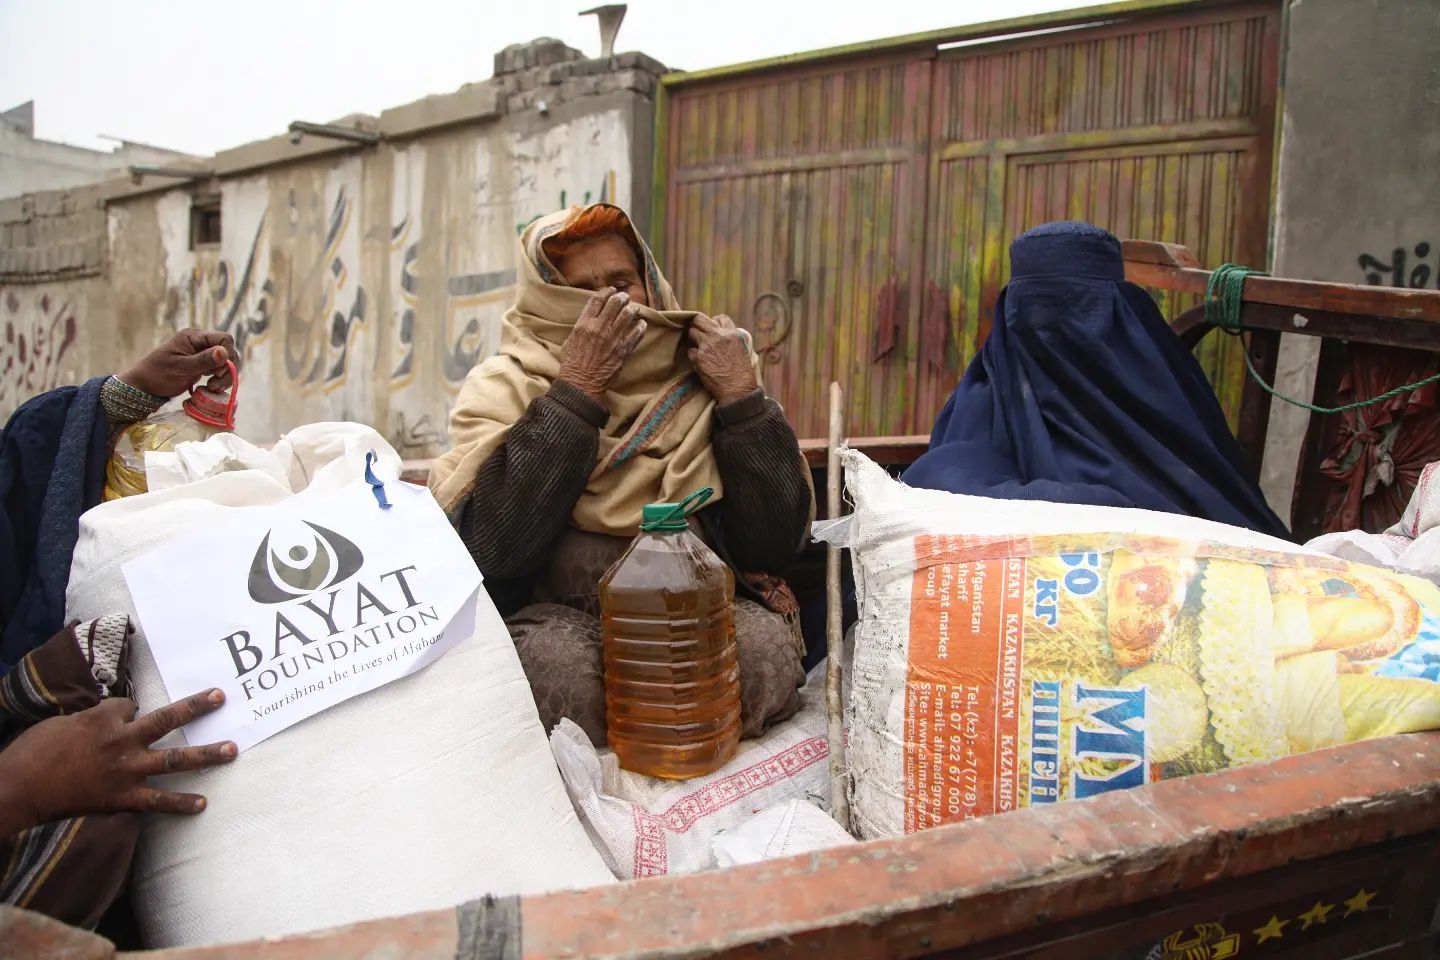 Bayat-Foundation-Food-Aids-Donation-in-Winter-5